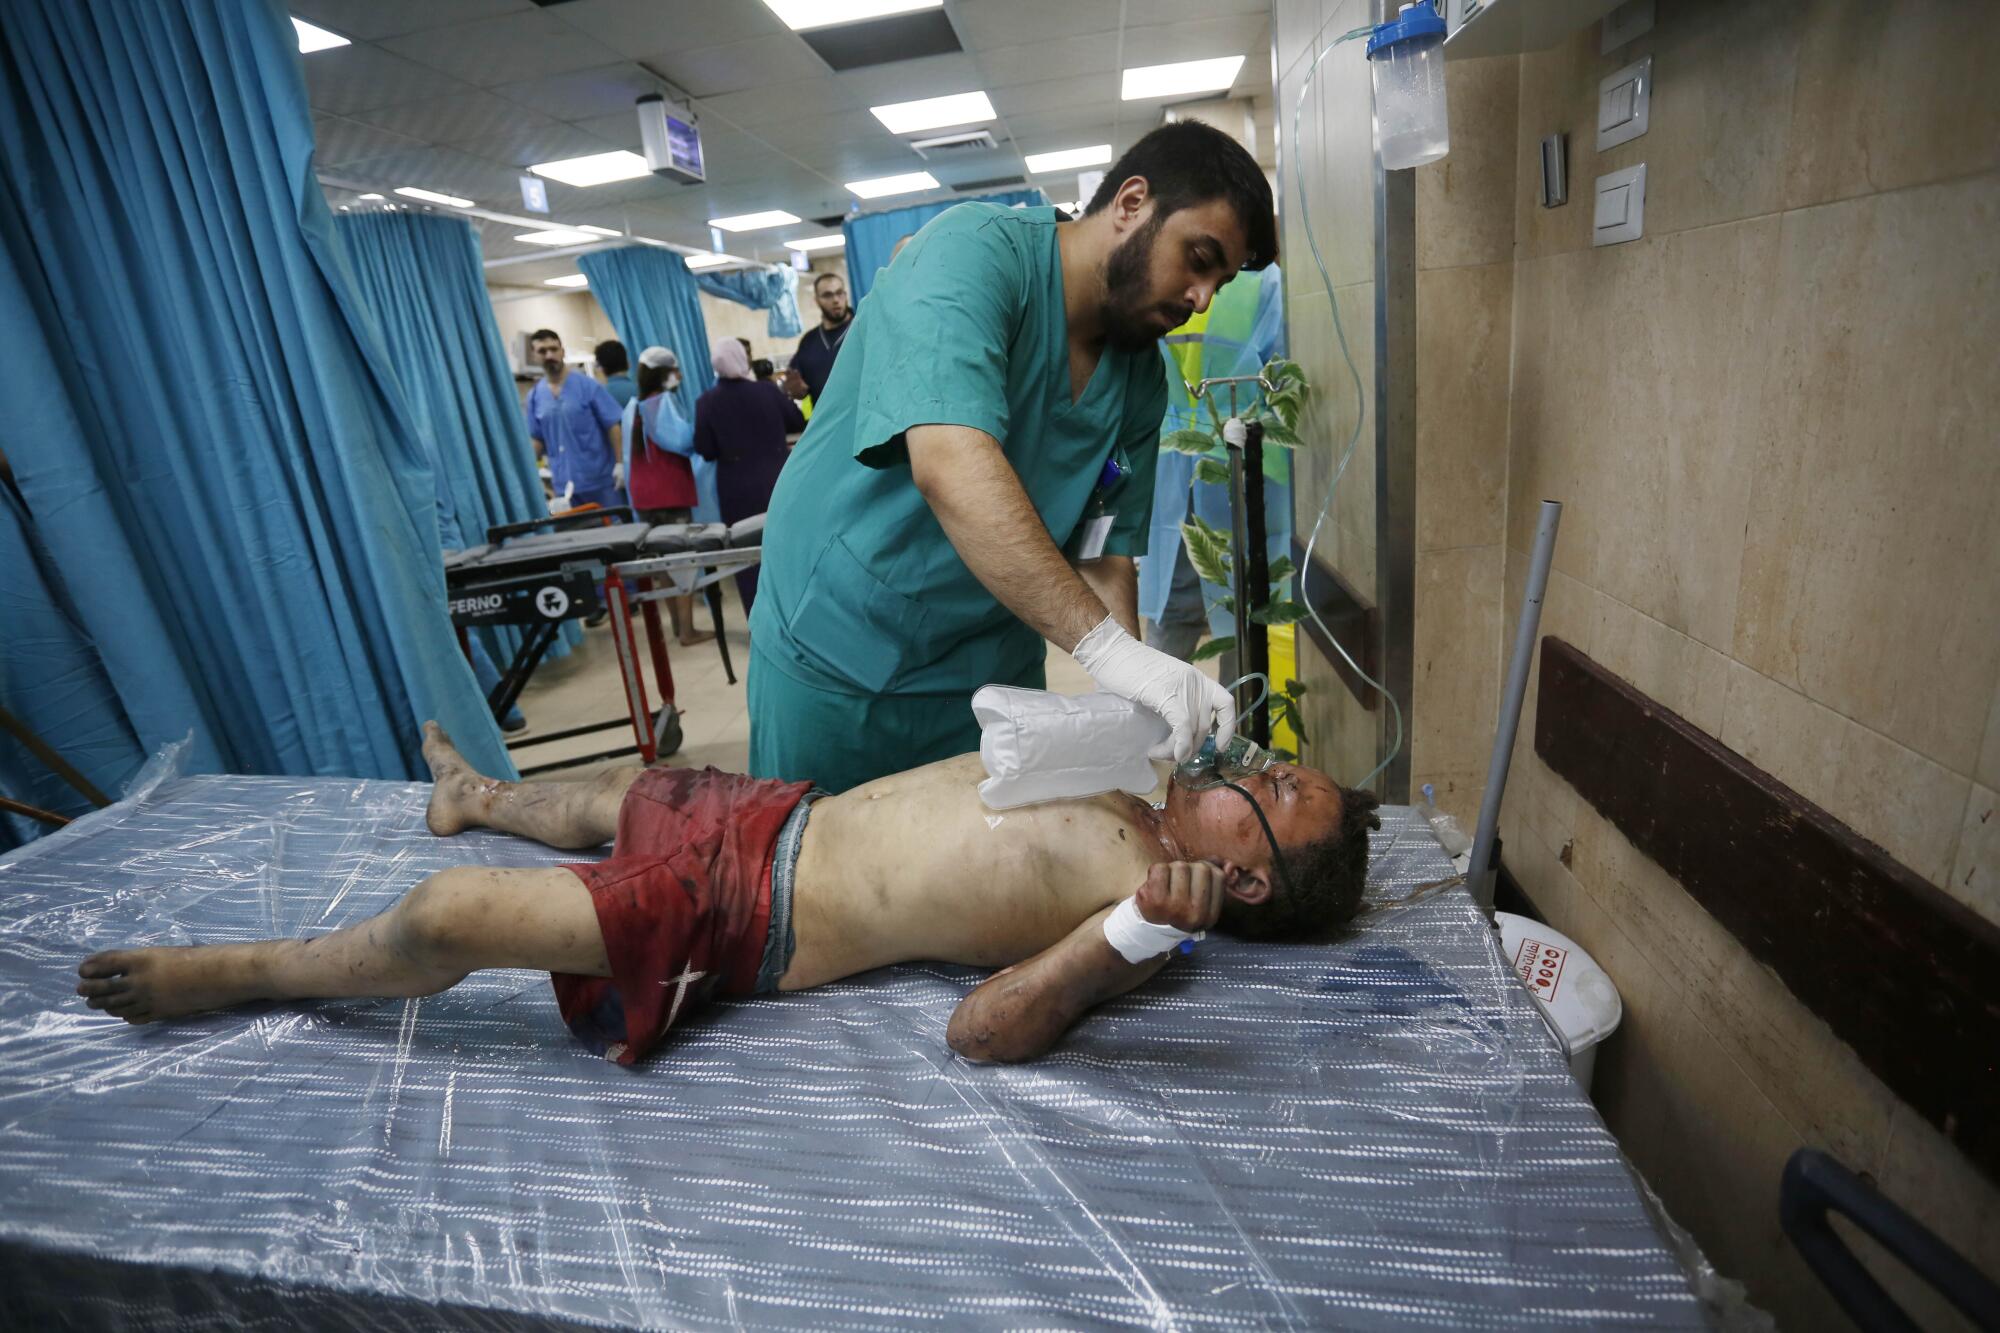 A doctor examines a child injured in Israeli attacks.